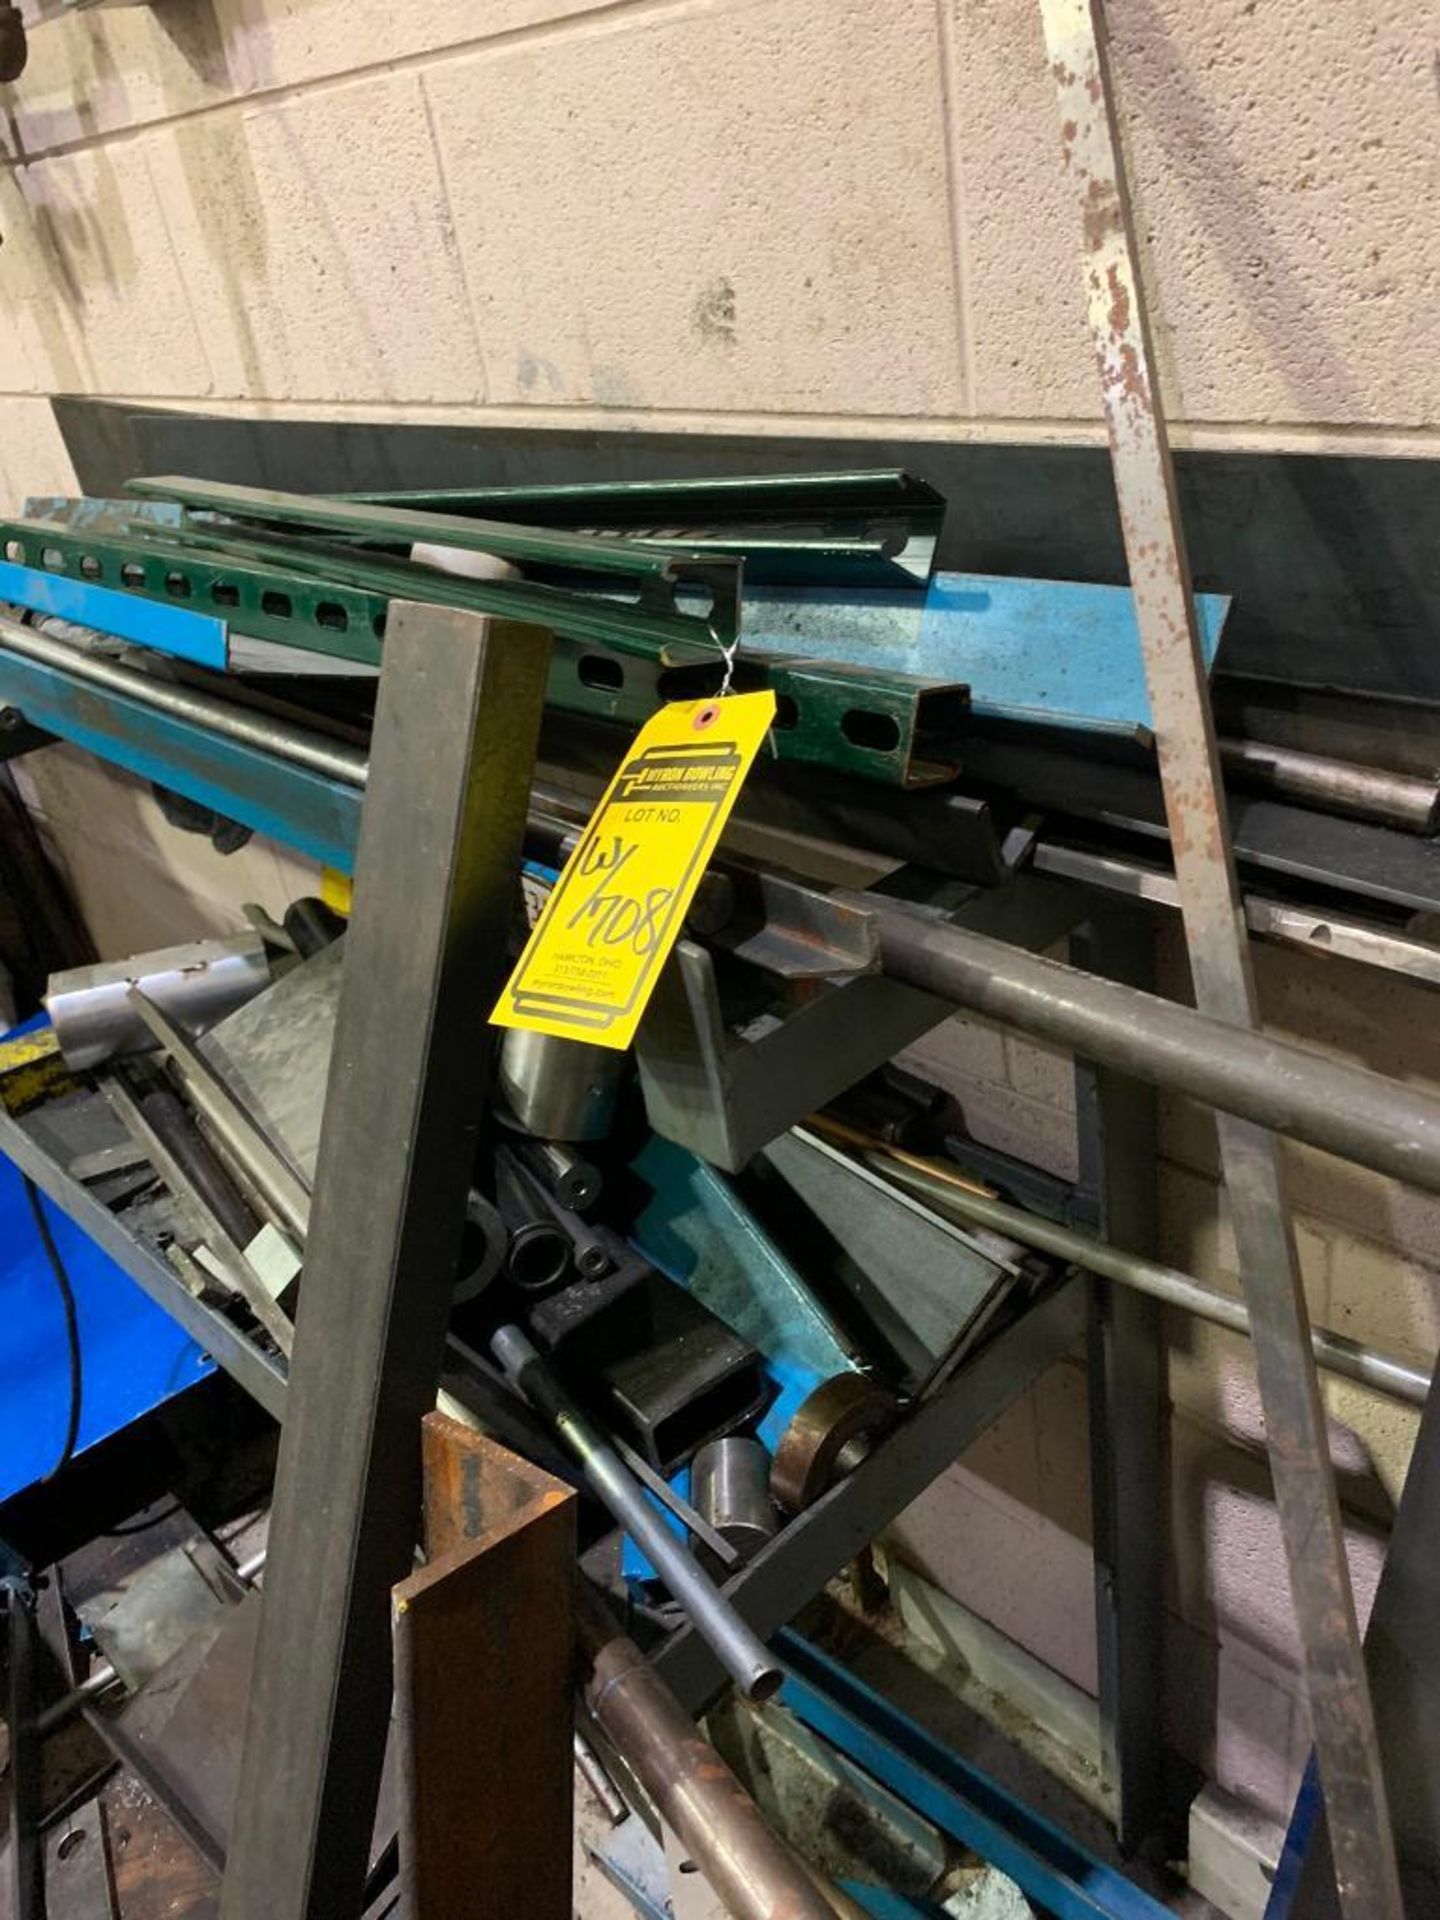 9" X 16" Horizontal Band Saw, Blade: 1" X .032" X 119-1/2" & Steel Rack w/ Content - Image 7 of 9